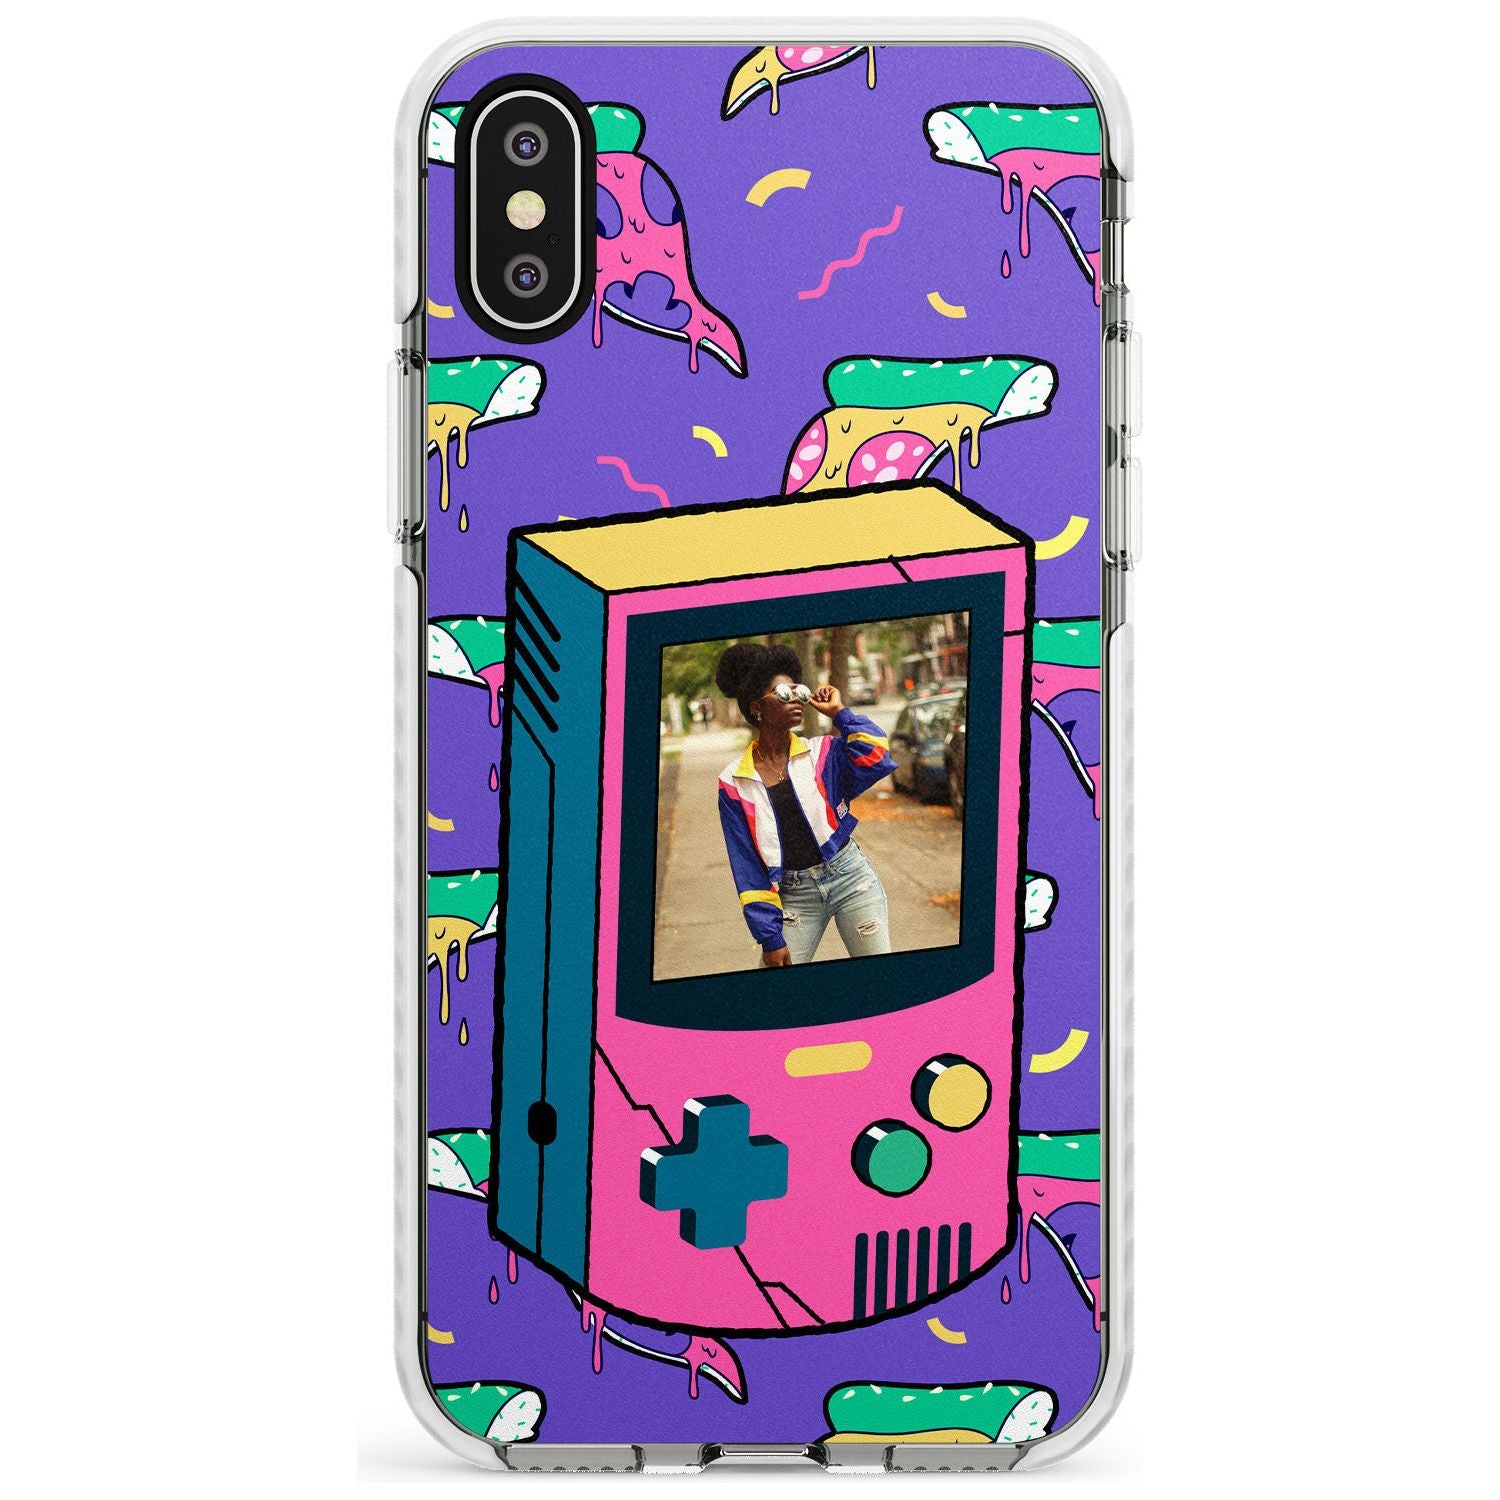 Personalised Retro Game Photo Case Impact Phone Case for iPhone X XS Max XR